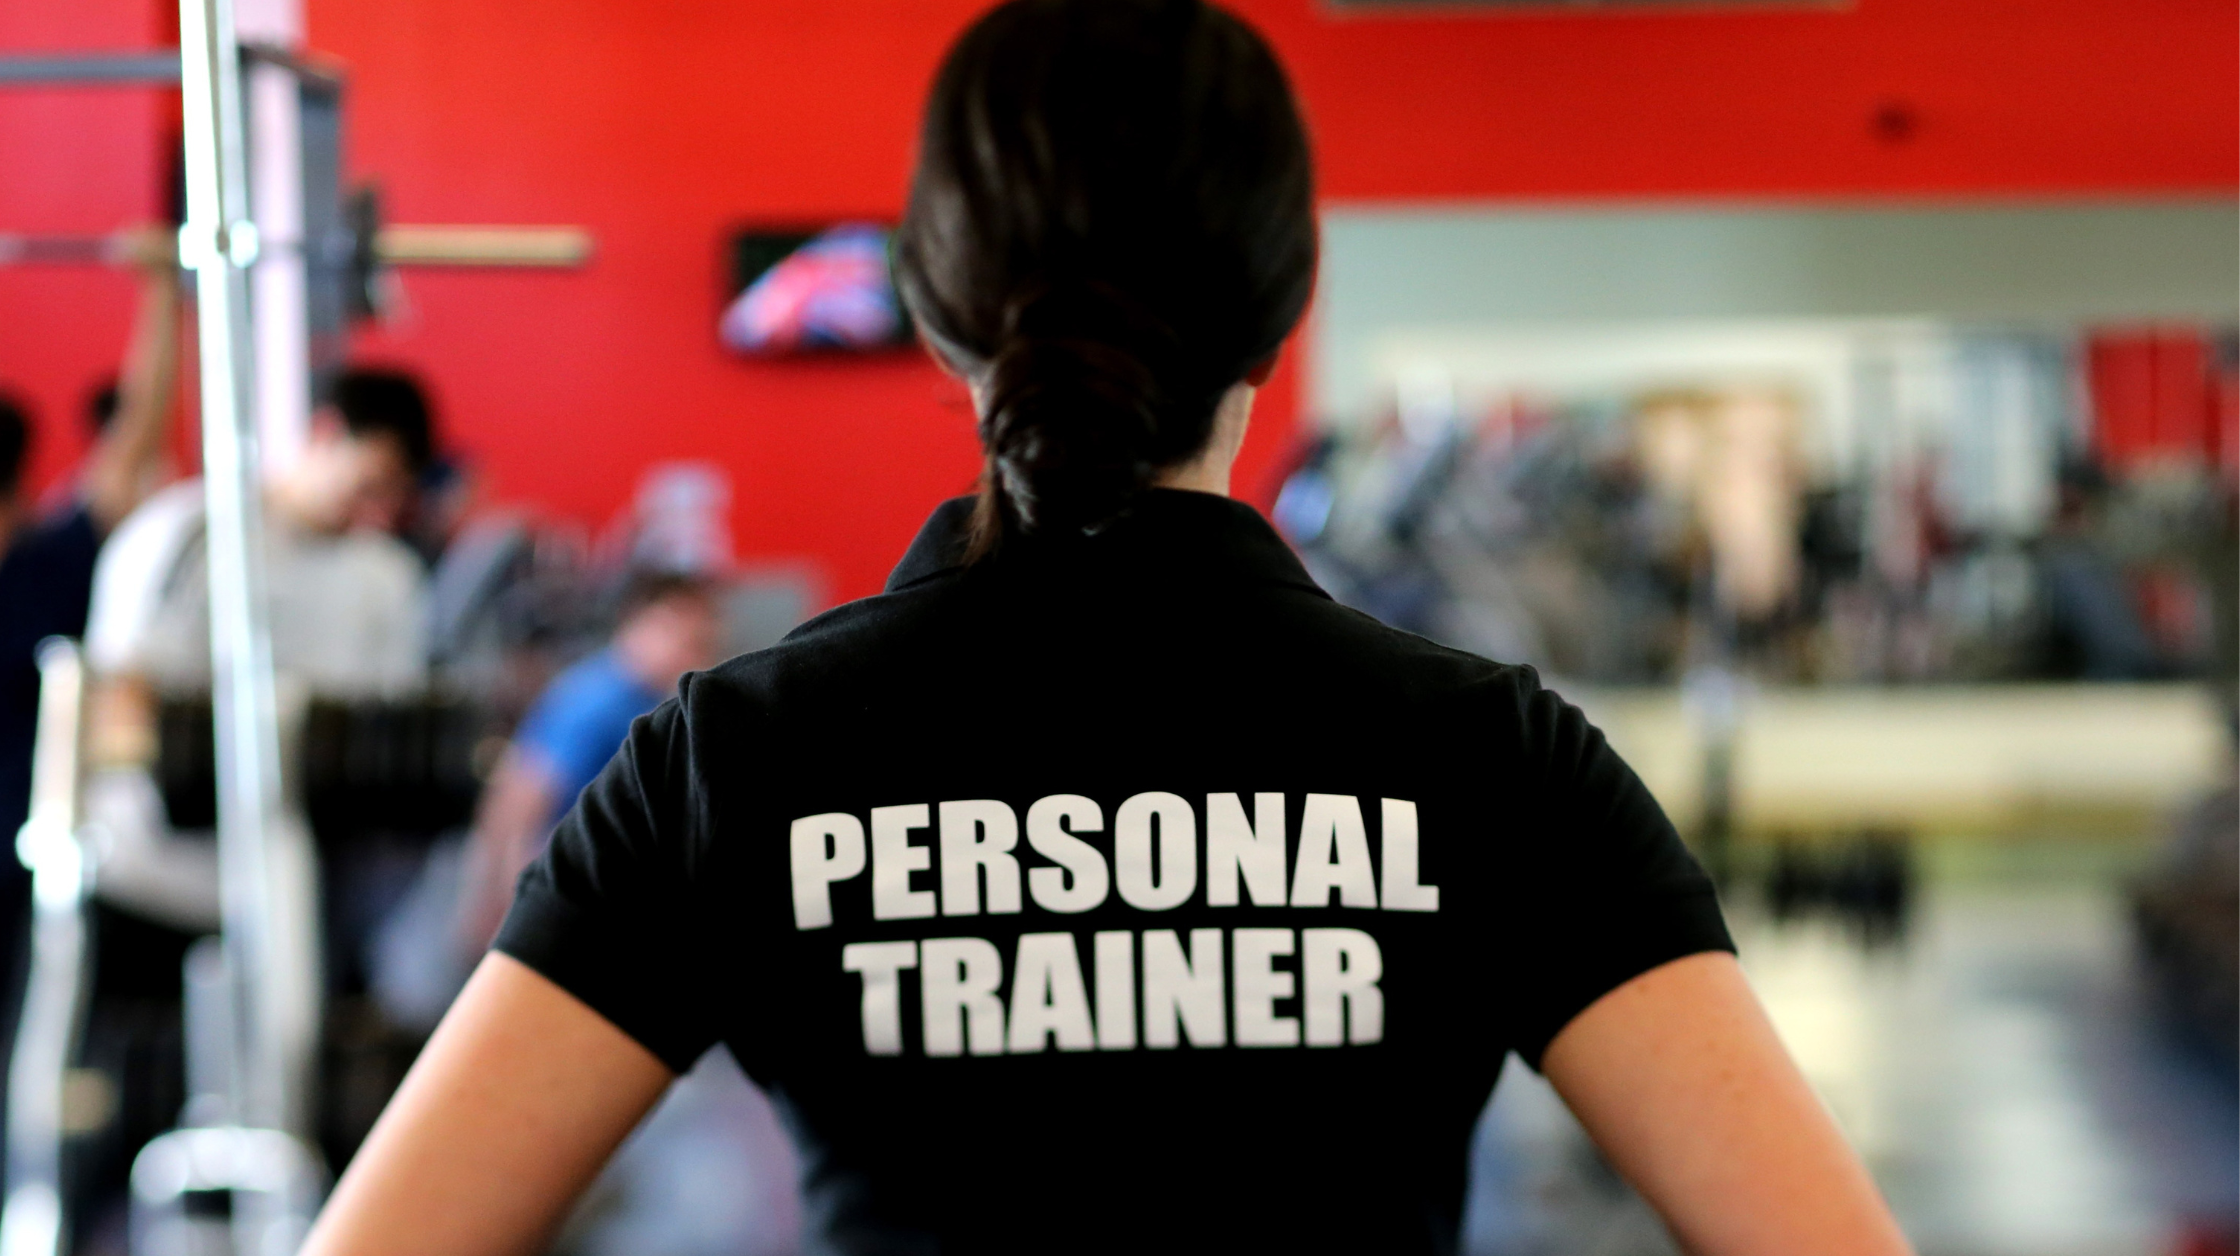 Personal trainer small business idea at home